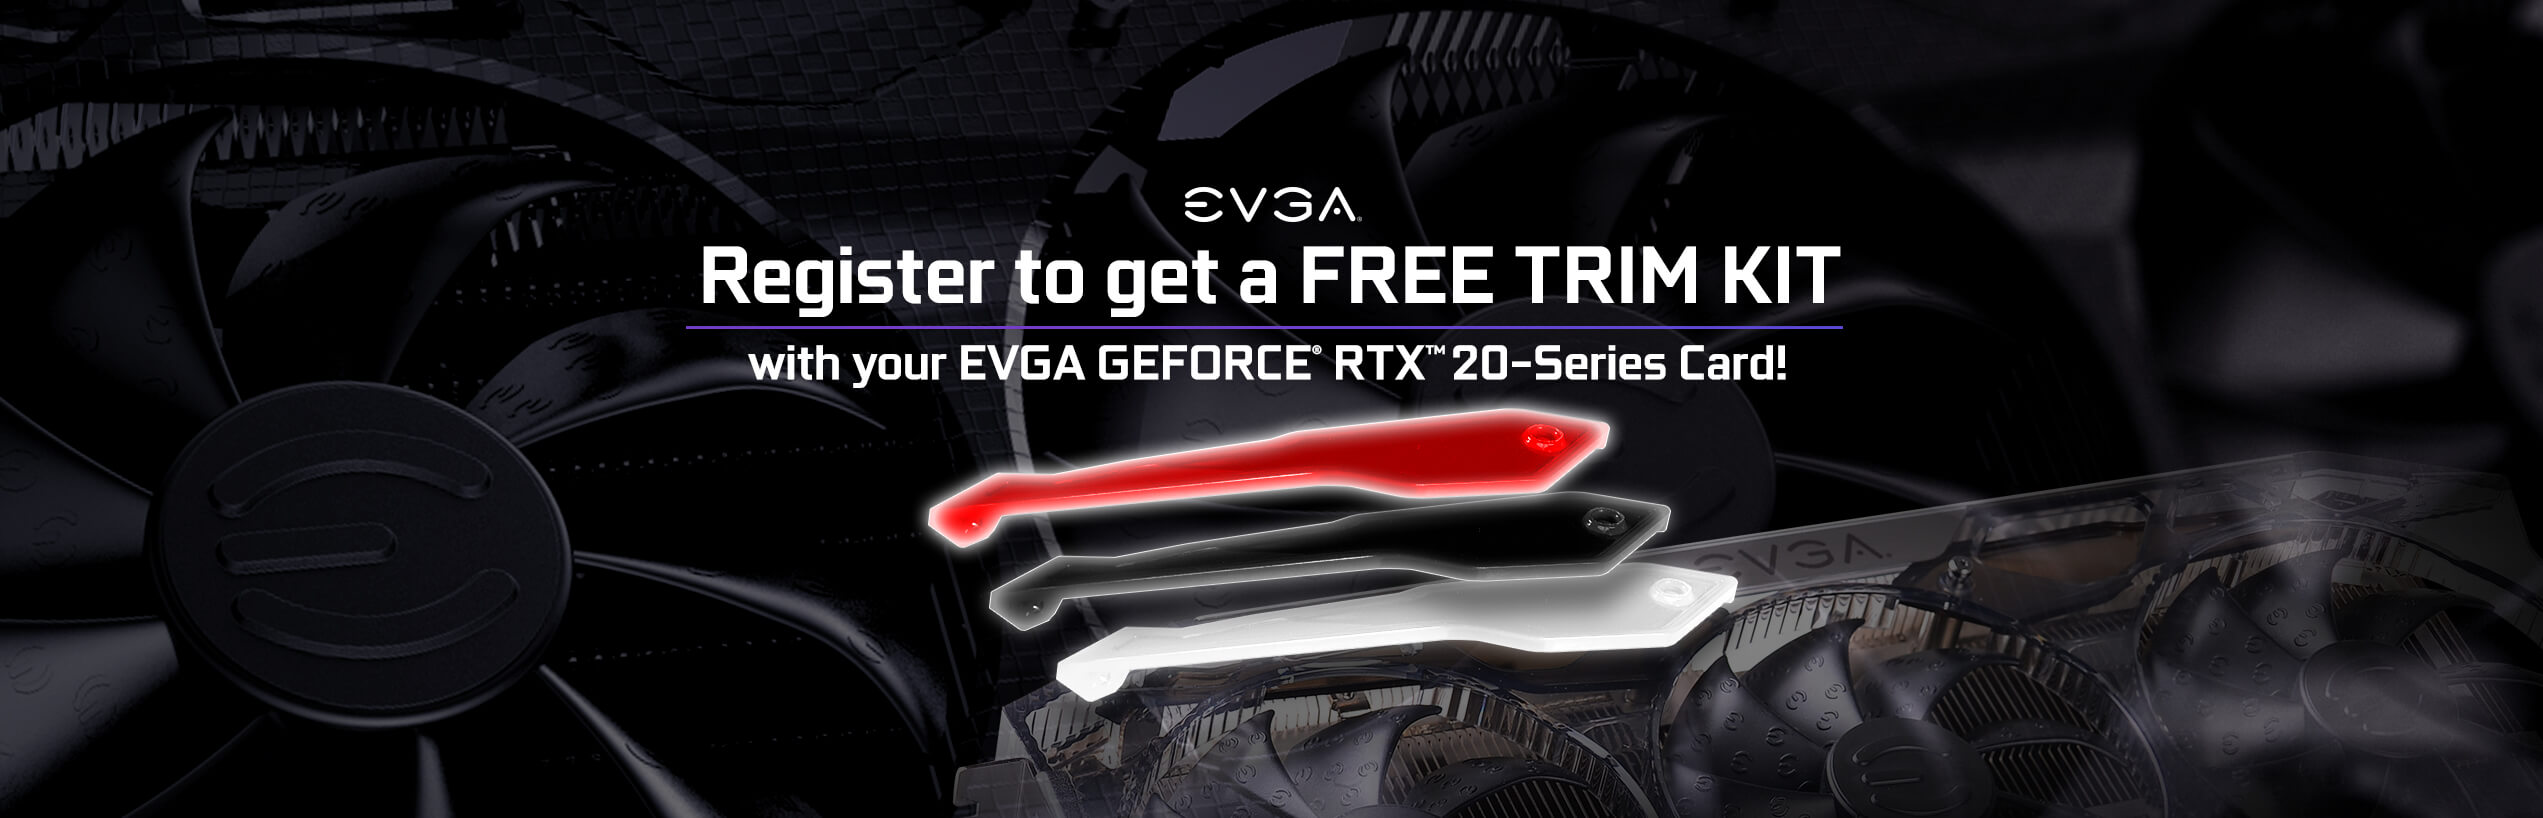 Register to get a FREE TRIM KIT with your EVGA GeForce® RTX™ 20-Series card!